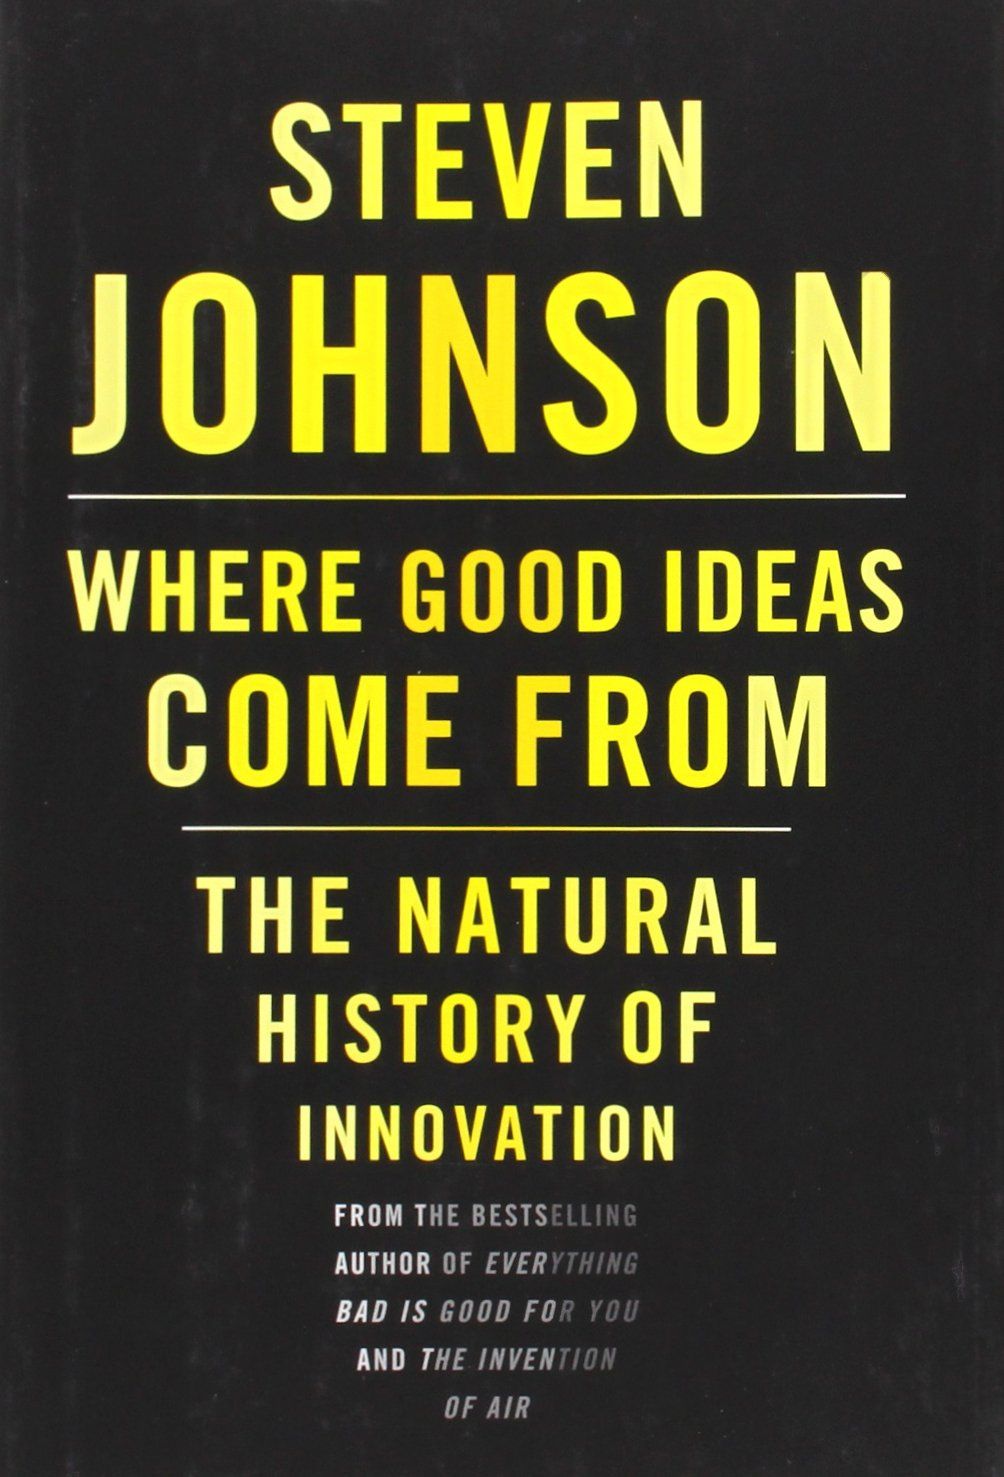 good ideas come from steven johnson epic book list